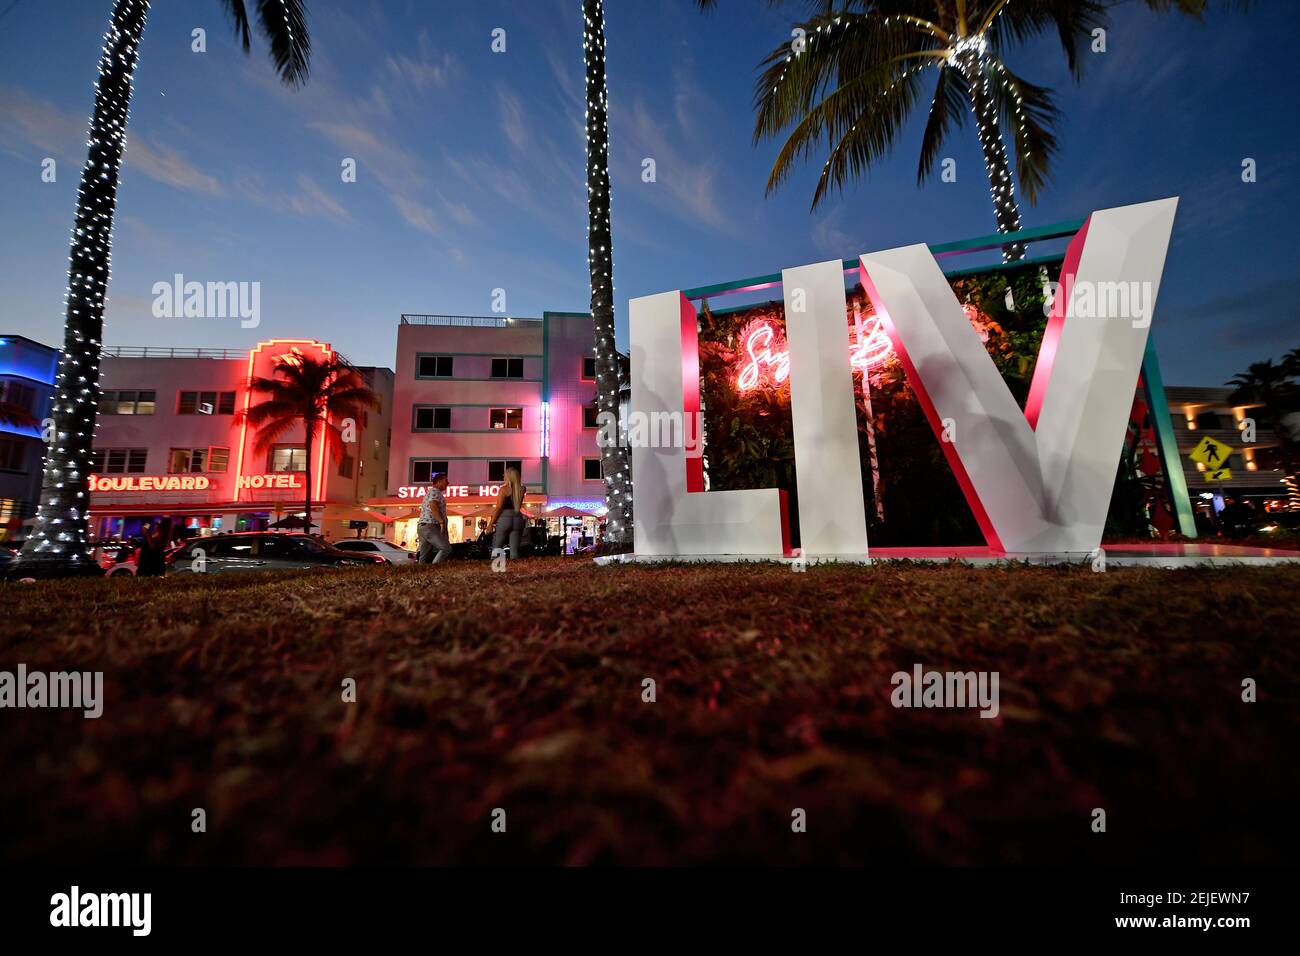 Jan 30, 2020; Miami, Florida, USA; A general view of the Super Bowl LIV logo off of Ocean Dr. in South Beach Miami prior to Super Bowl LIV between the San Francisco 49ers at Kansas City Chiefs. Mandatory Credit: Jasen Vinlove-USA TODAY Sports/Sipa USA Stock Photo